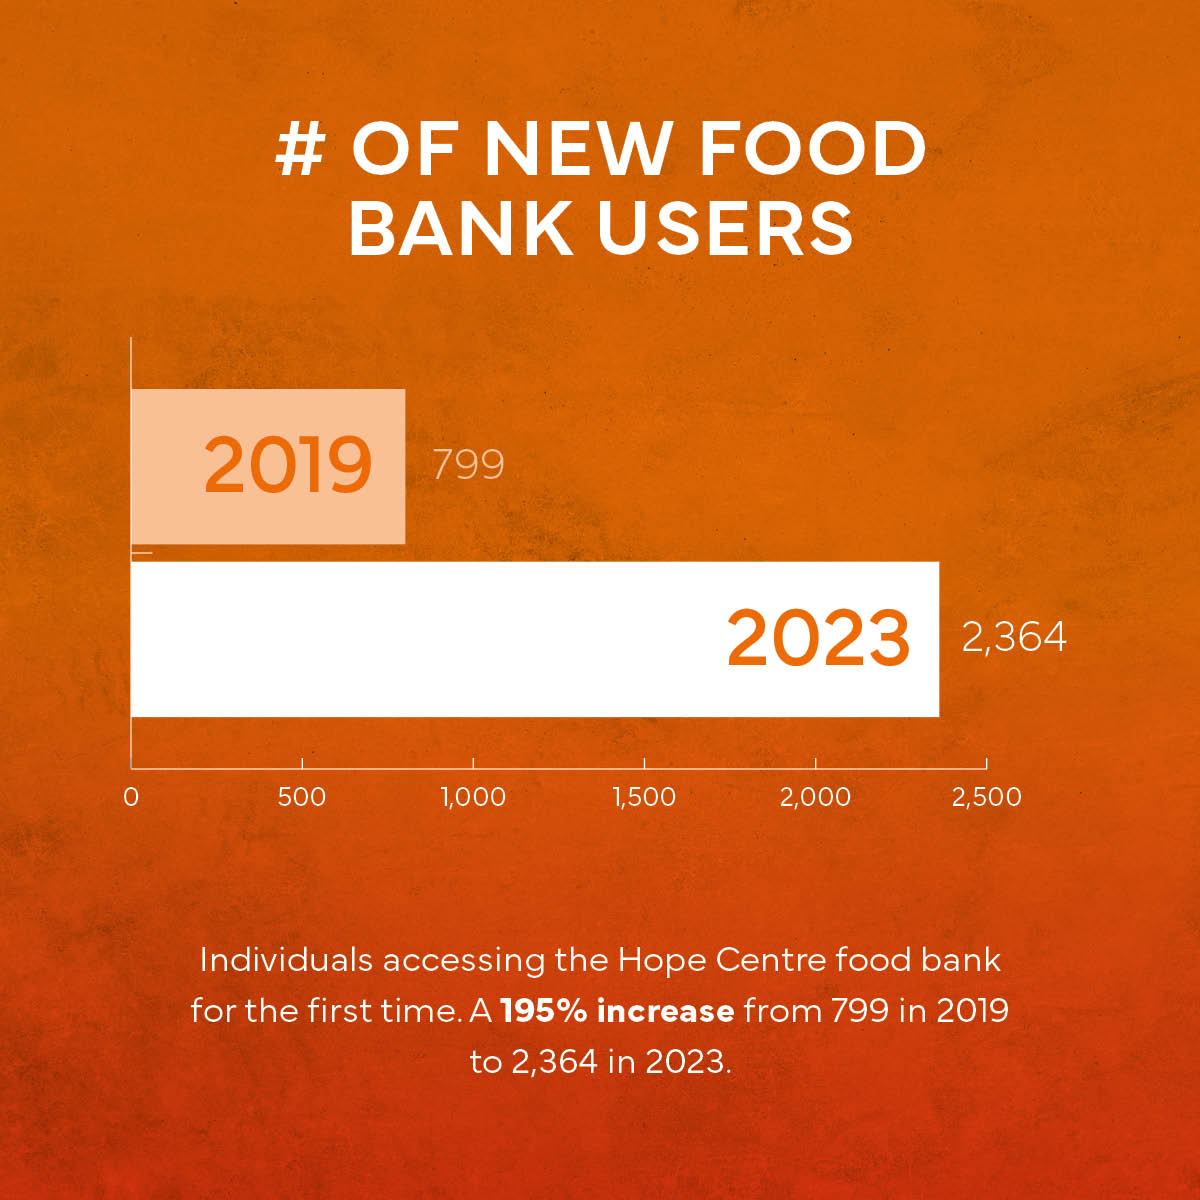 Infographic showing the number of new food bank users. A 195% increase from 799 in 2019 to 2,364 in 2023.